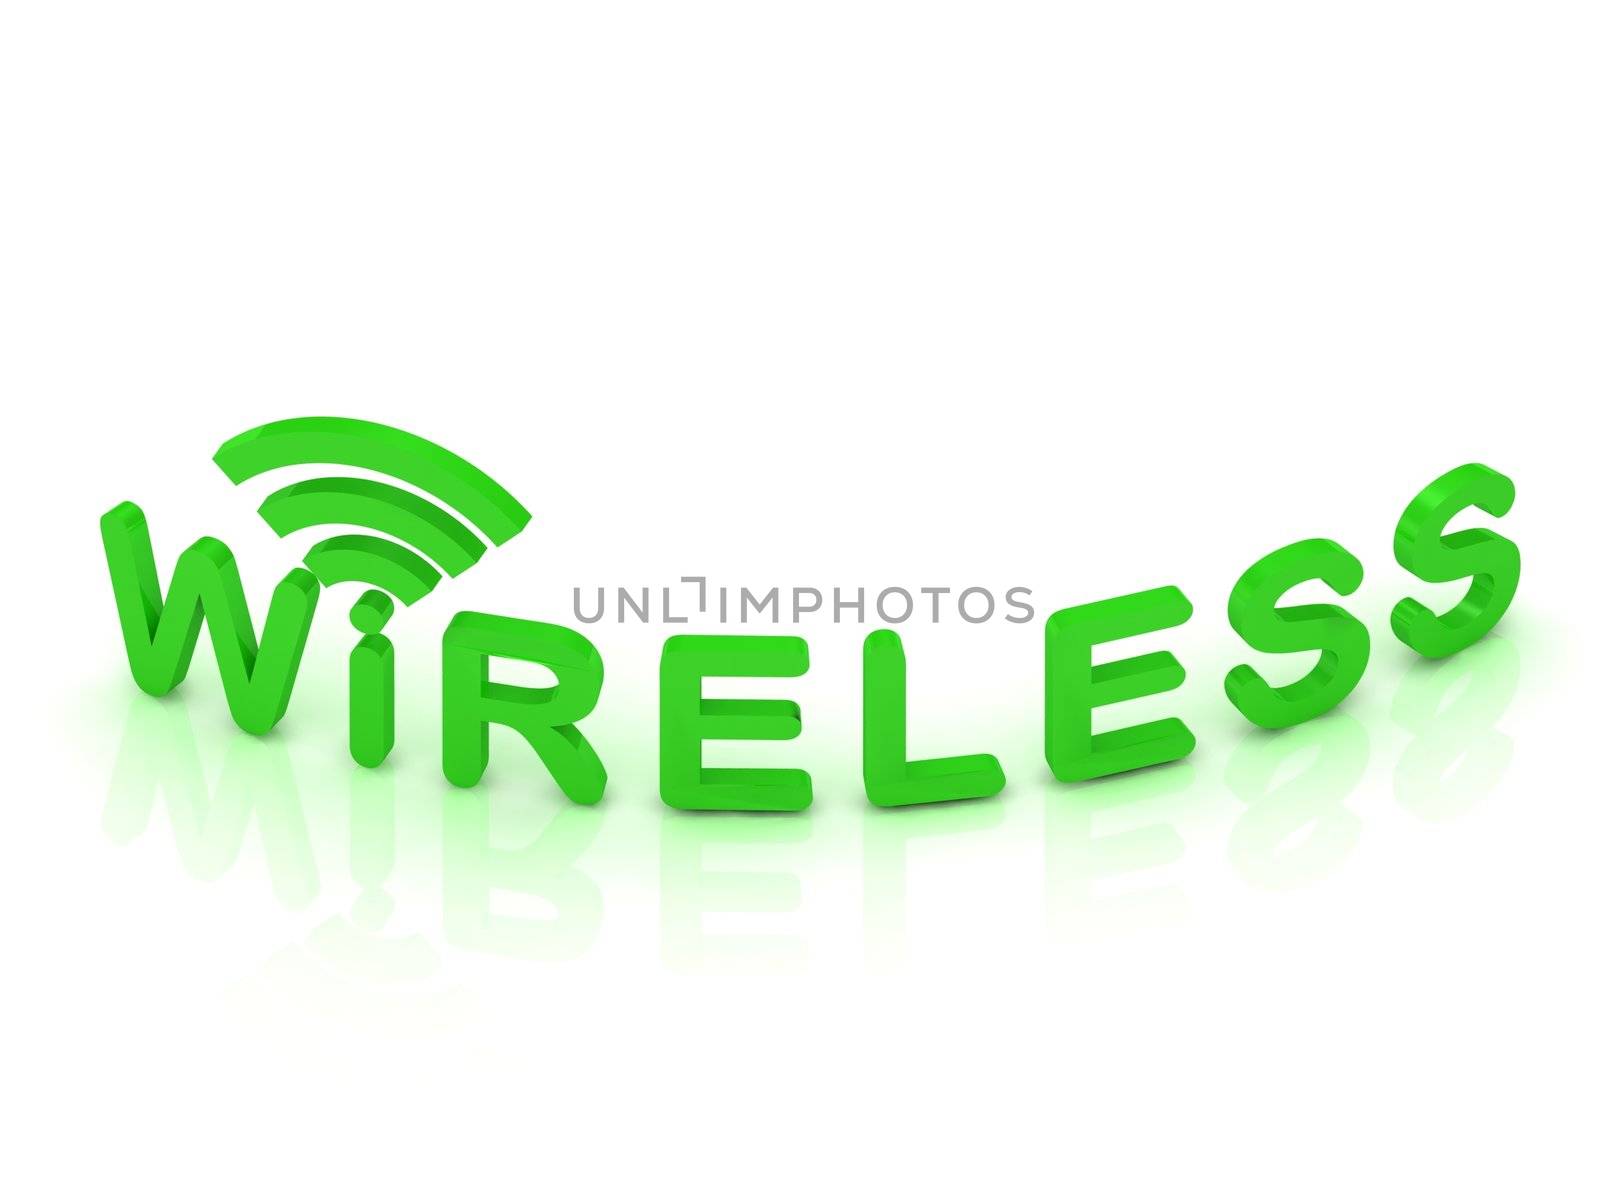 green Wireless logo, 3D render image on isolated white background